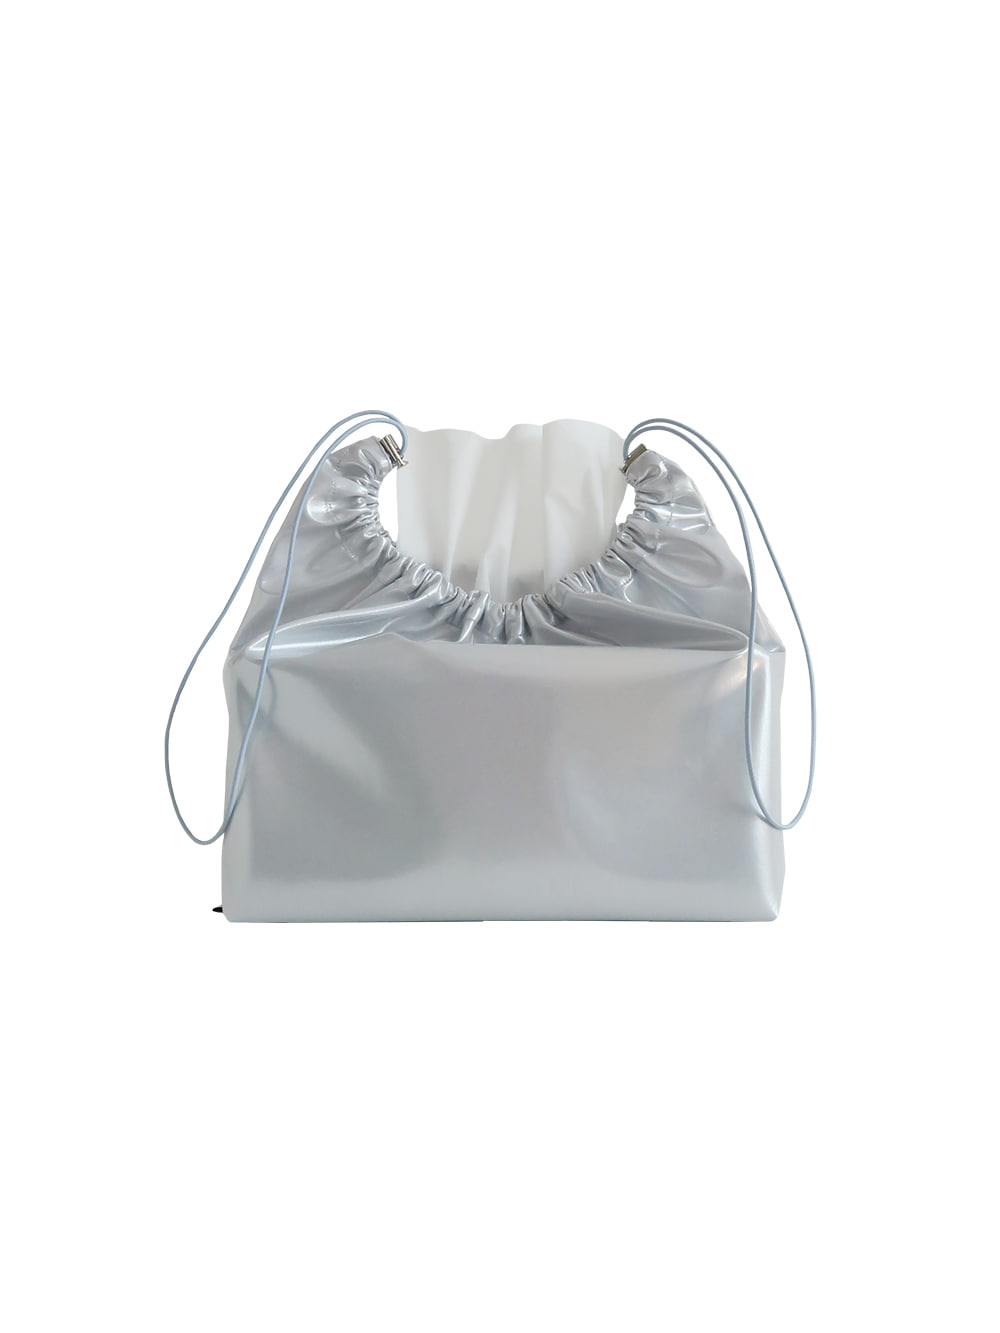 MELL TISSUE COVER (SILVER)